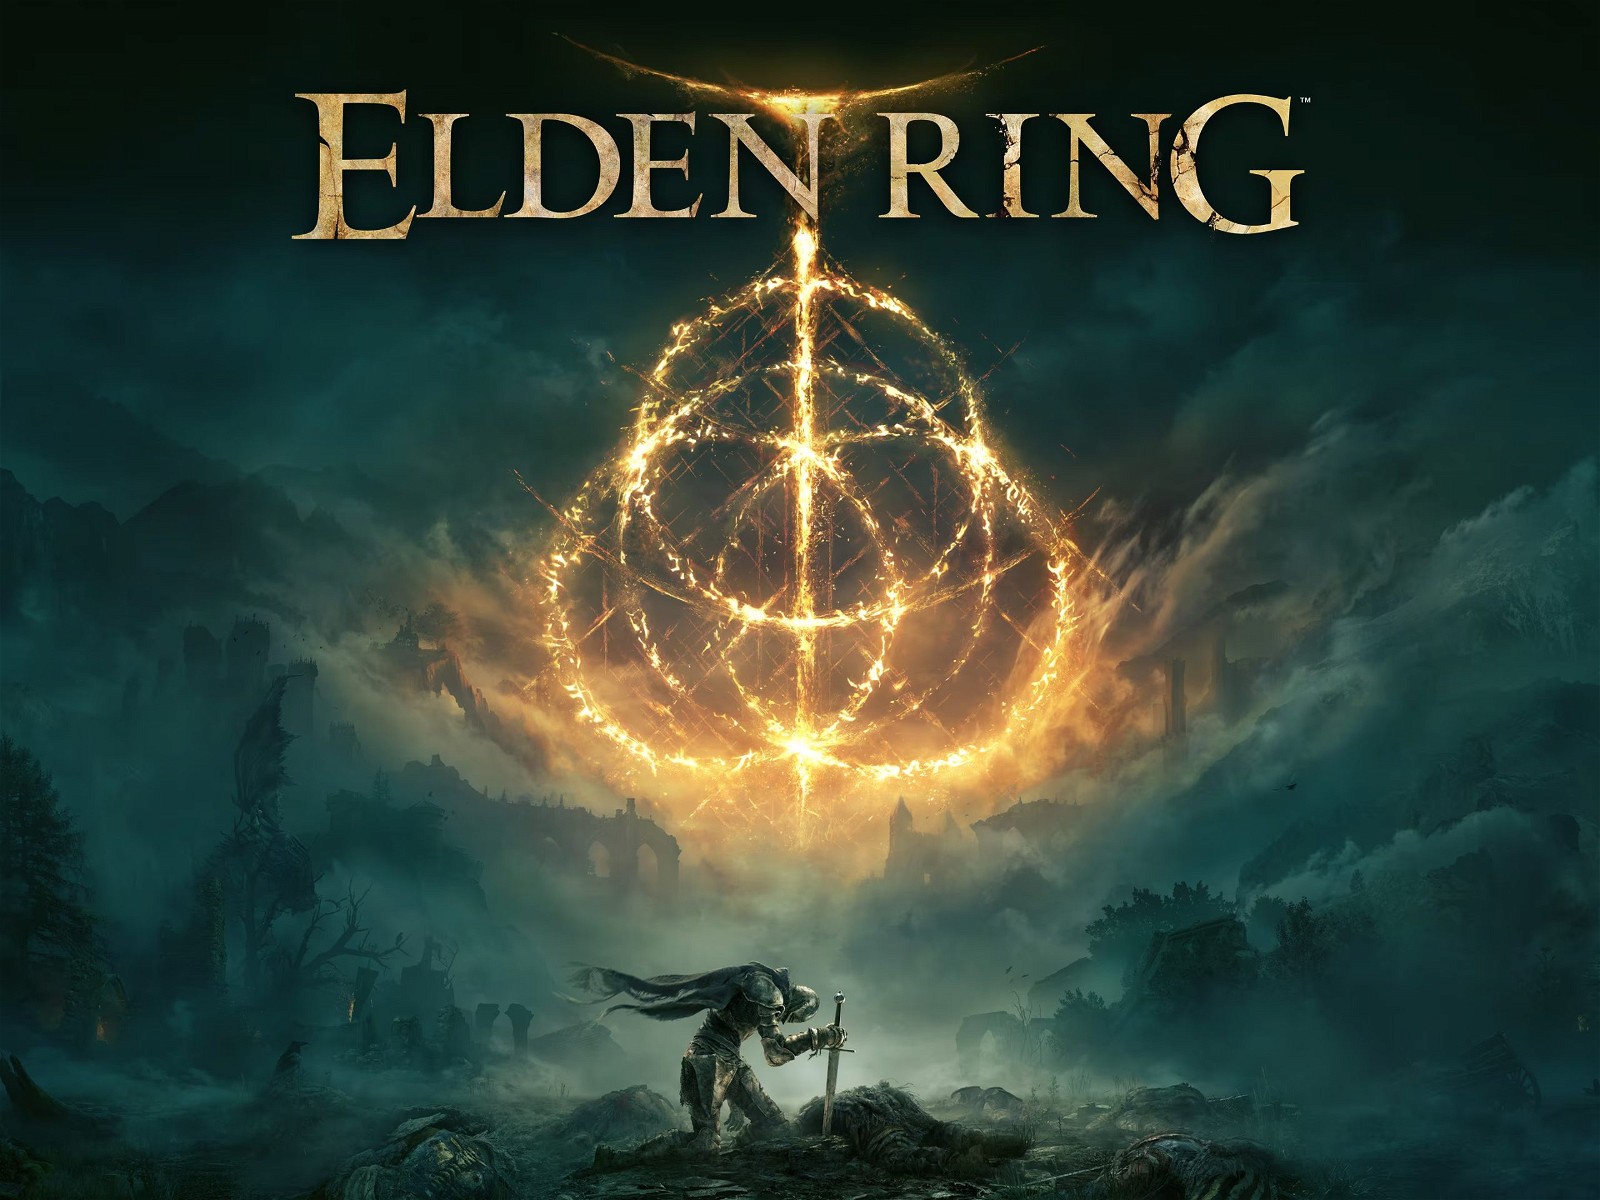 Elden Ring’s sales recently exceeded 25 million, according to FromSoftware.